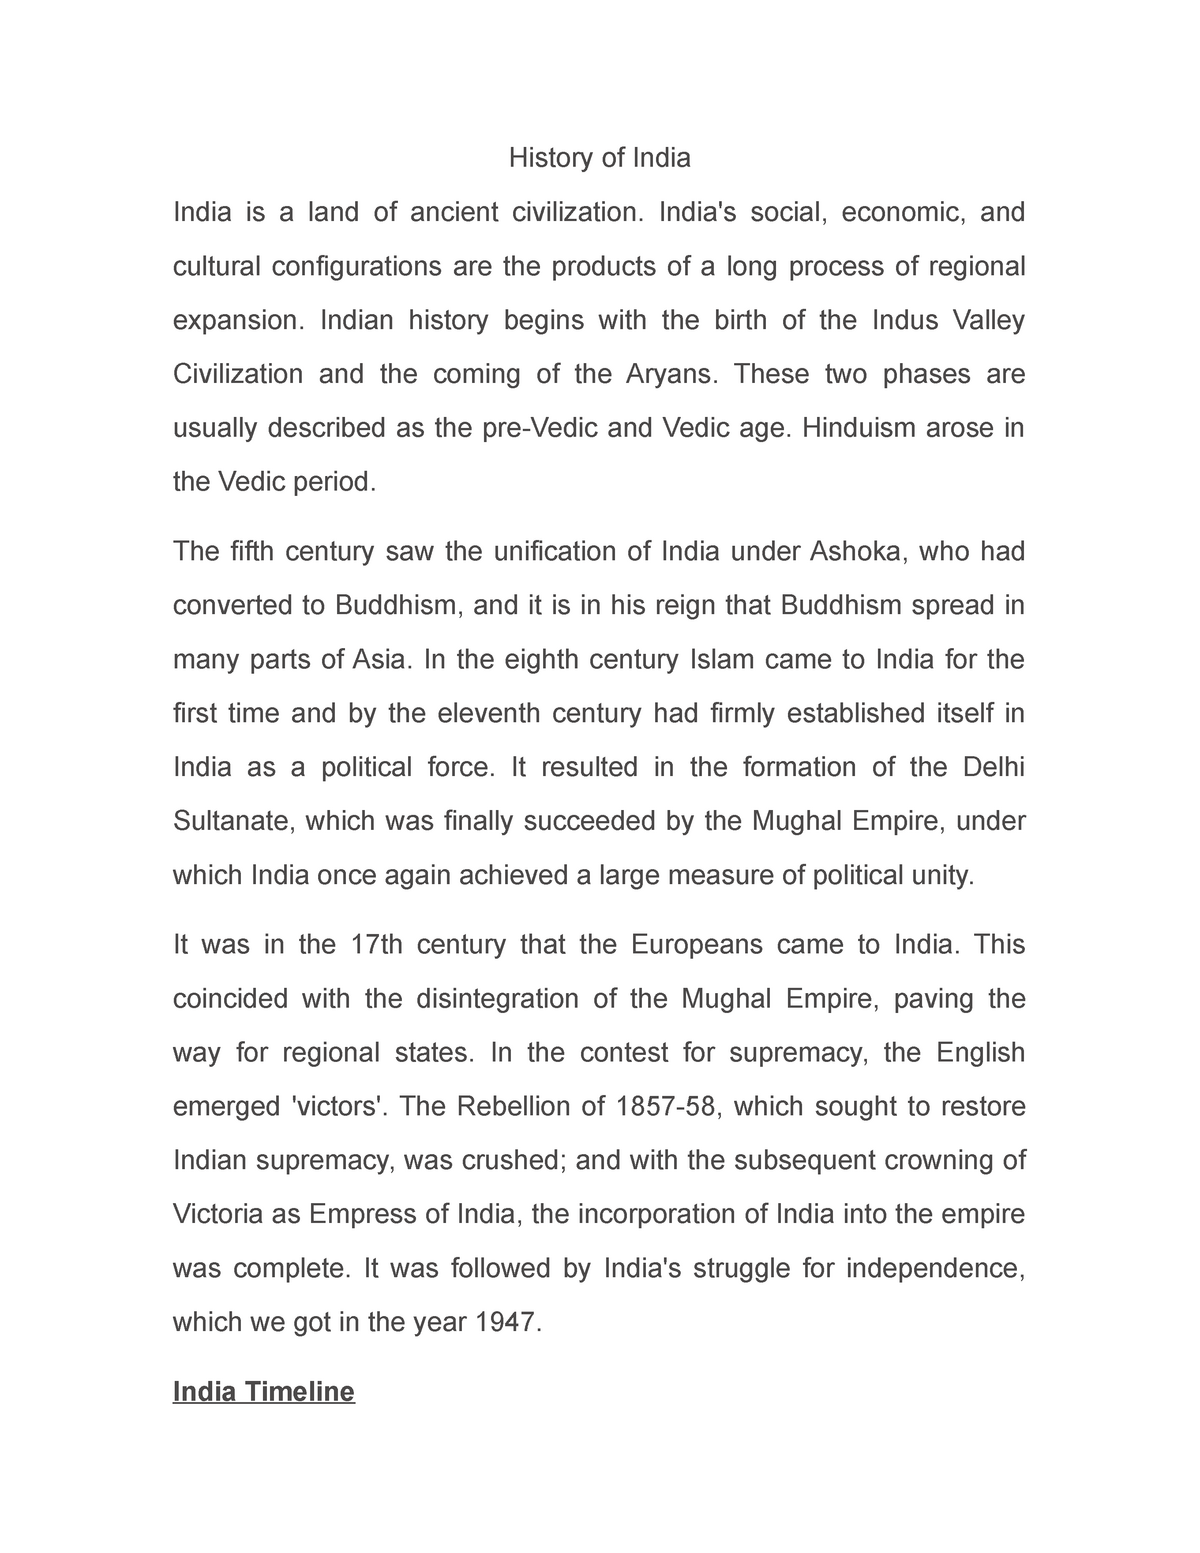 thesis on indian history